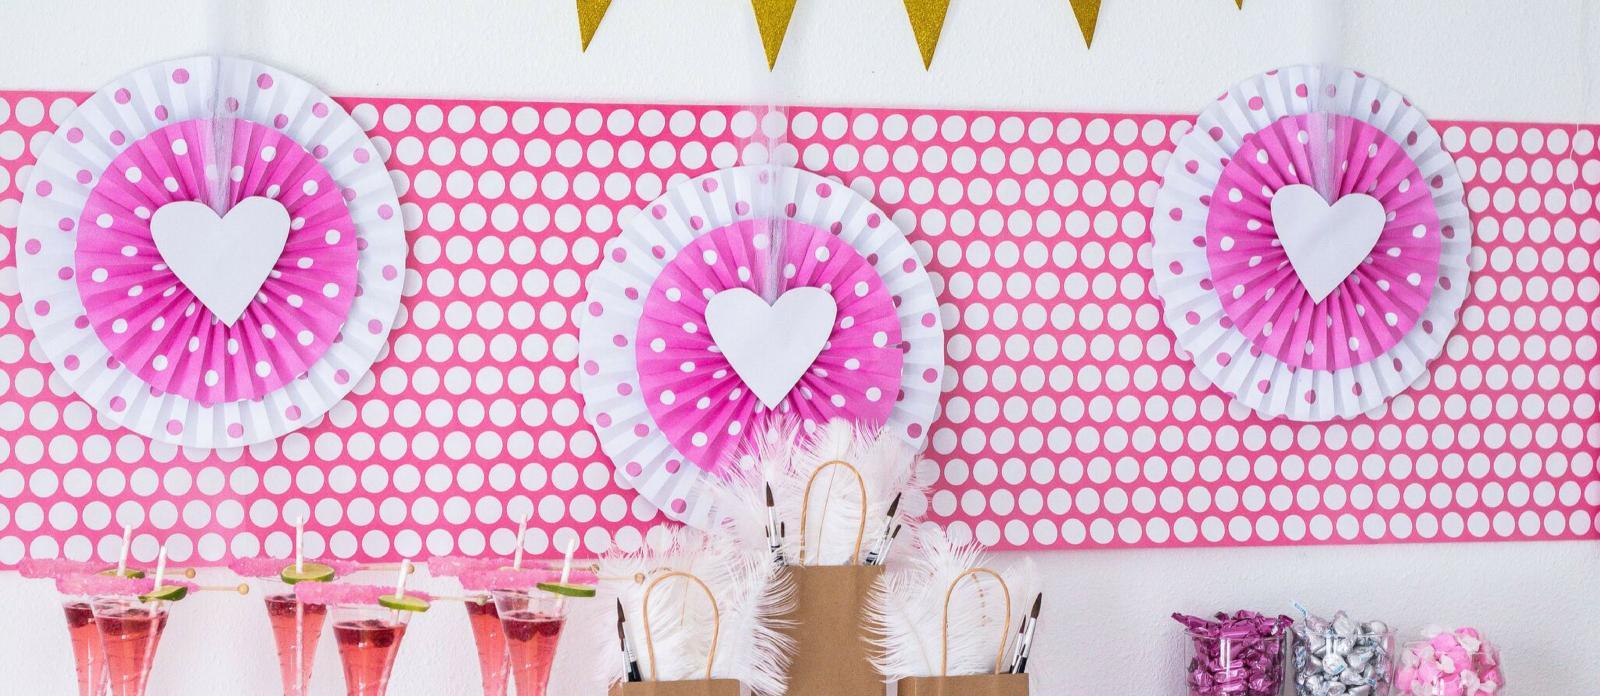 DIY Galentine's Day Party Centerpiece + Backdrop